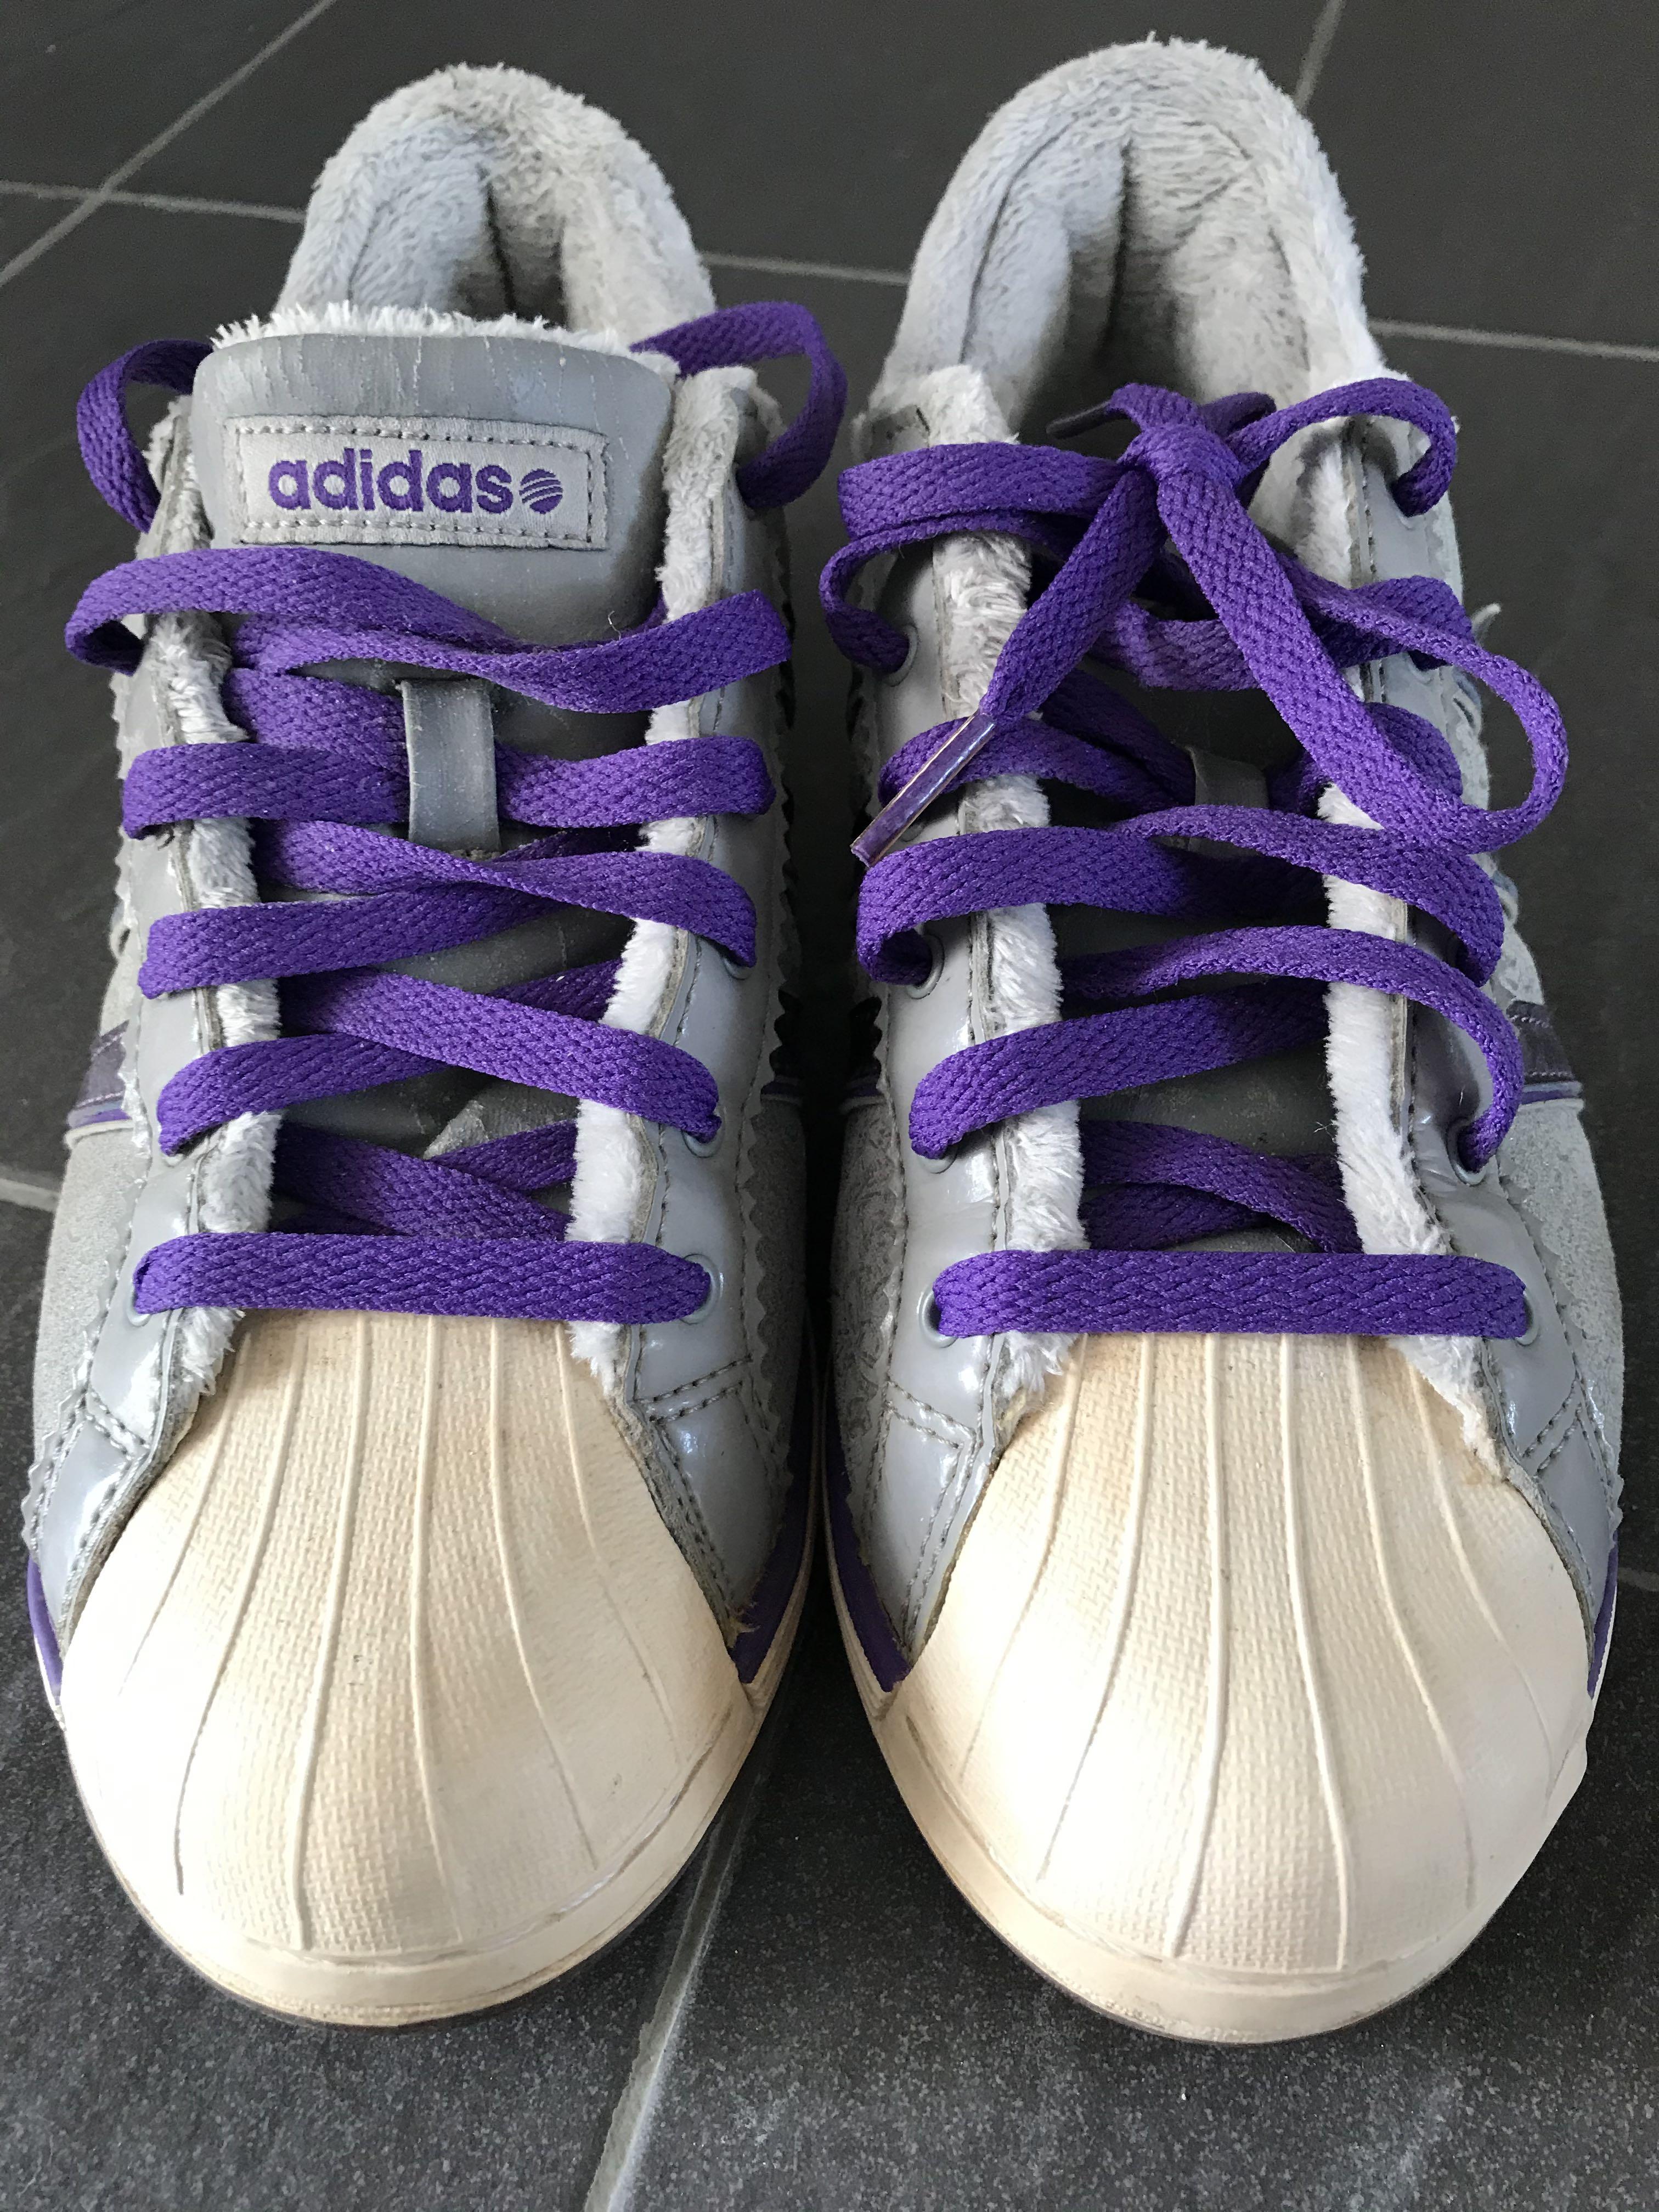 Adidas Neo Label Vibetouch Shoes Advanced System Womens Size Yoga Training Running Walking Hiking Sneakers Leather Purple Shiny 3 Stripes / Suitable for both Adult / Teenager / Kids,